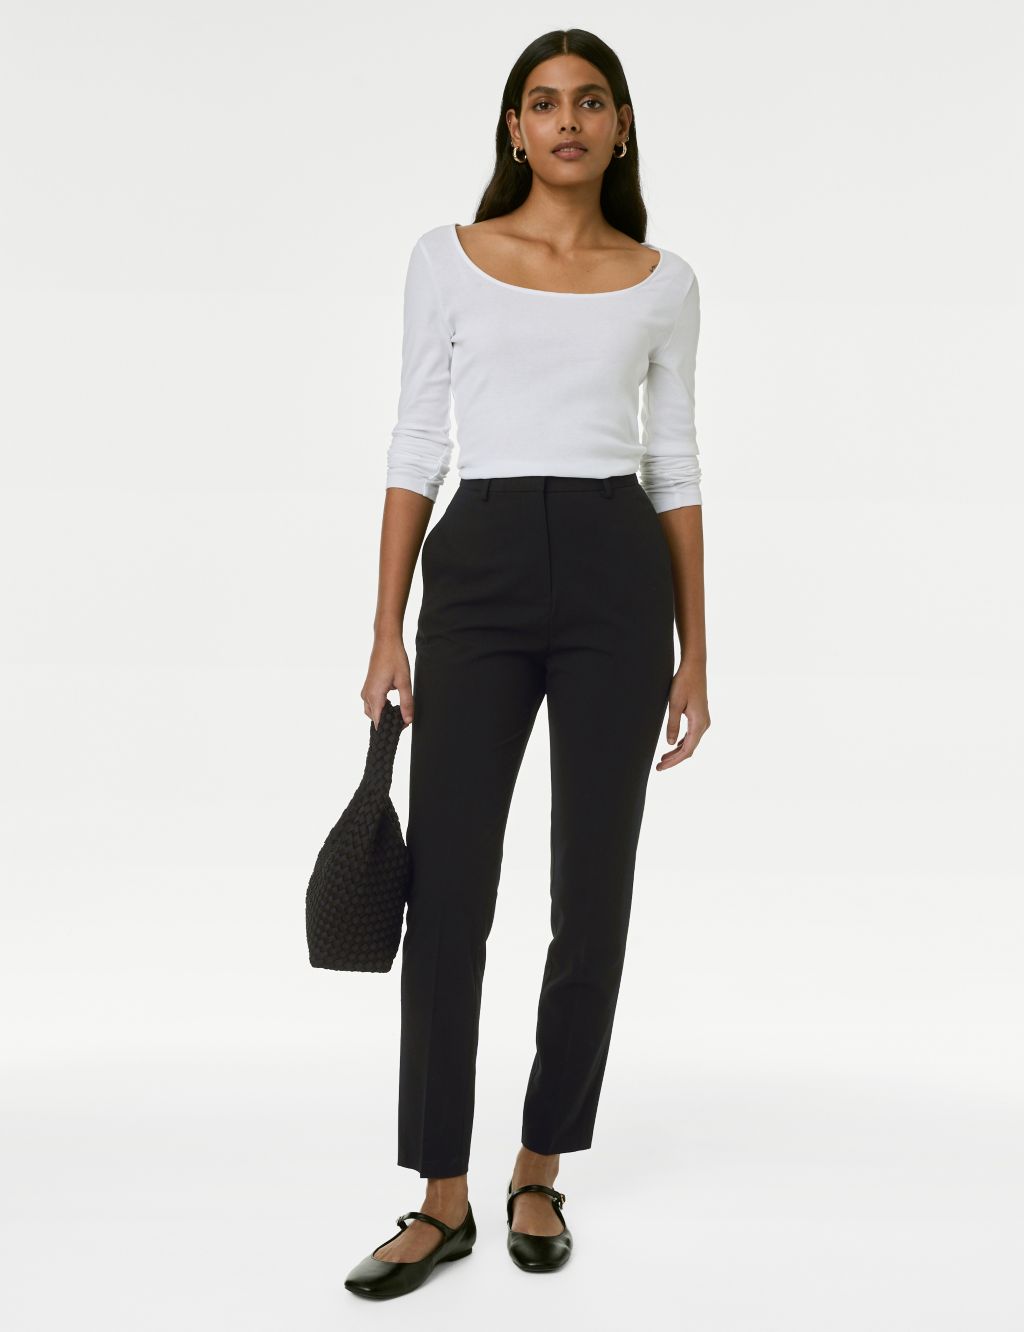 https://asset1.cxnmarksandspencer.com/is/image/mands/Slim-Fit-Ankle-Grazer-Trousers-with-Stretch/SD_01_T59_0065_Y0_X_EC_0?$PDP_IMAGEGRID$&wid=1024&qlt=80